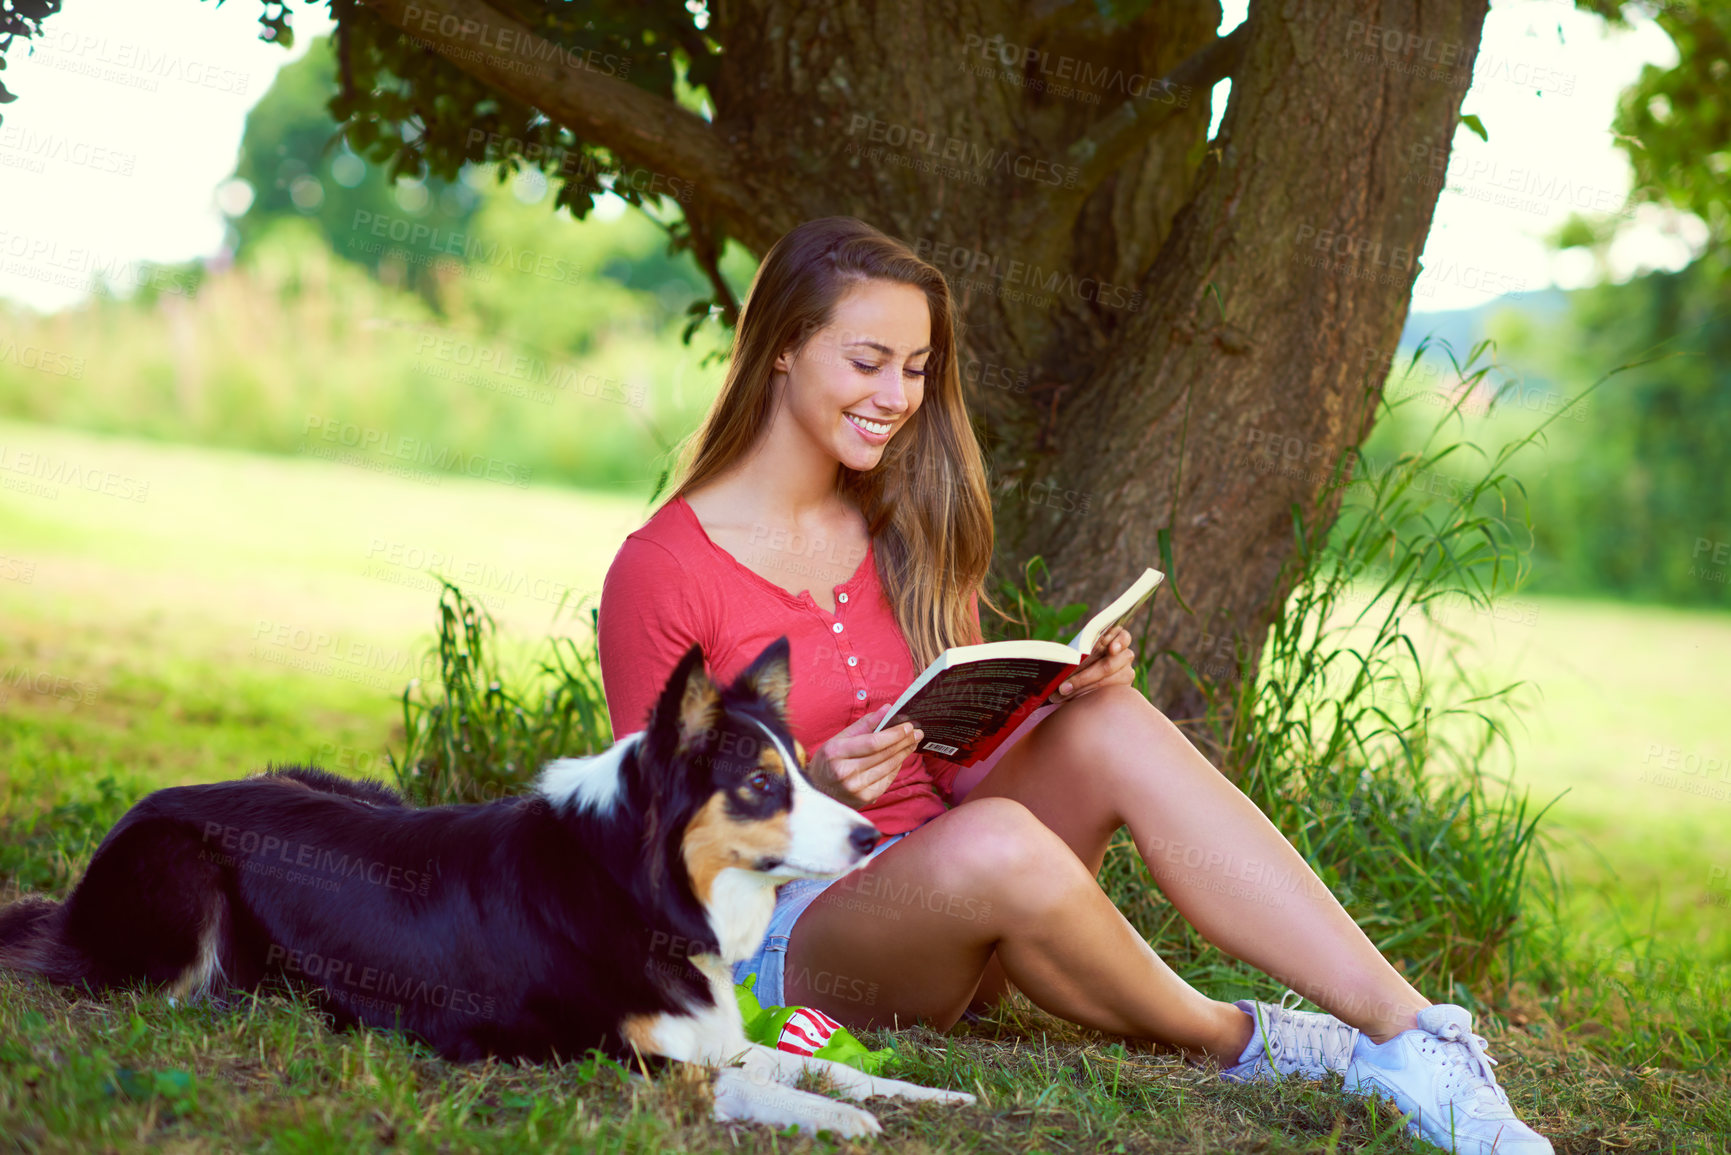 Buy stock photo Shot of a young woman reading a book while sitting with her dog under a tree